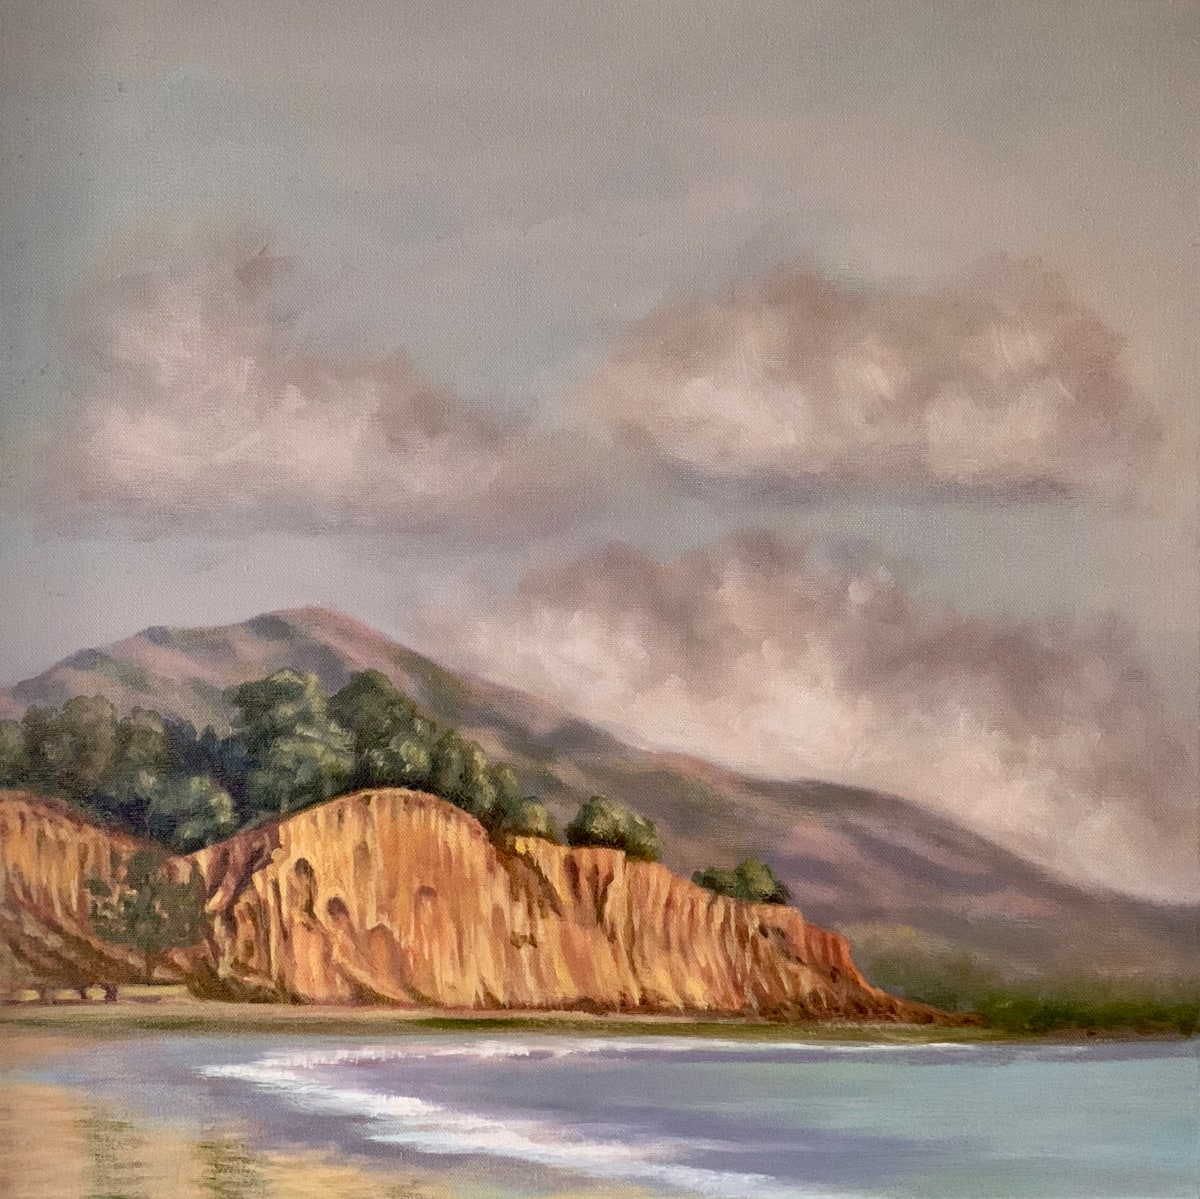 One of One, Summerland, Loon Point 1/1 by Karen Haub 